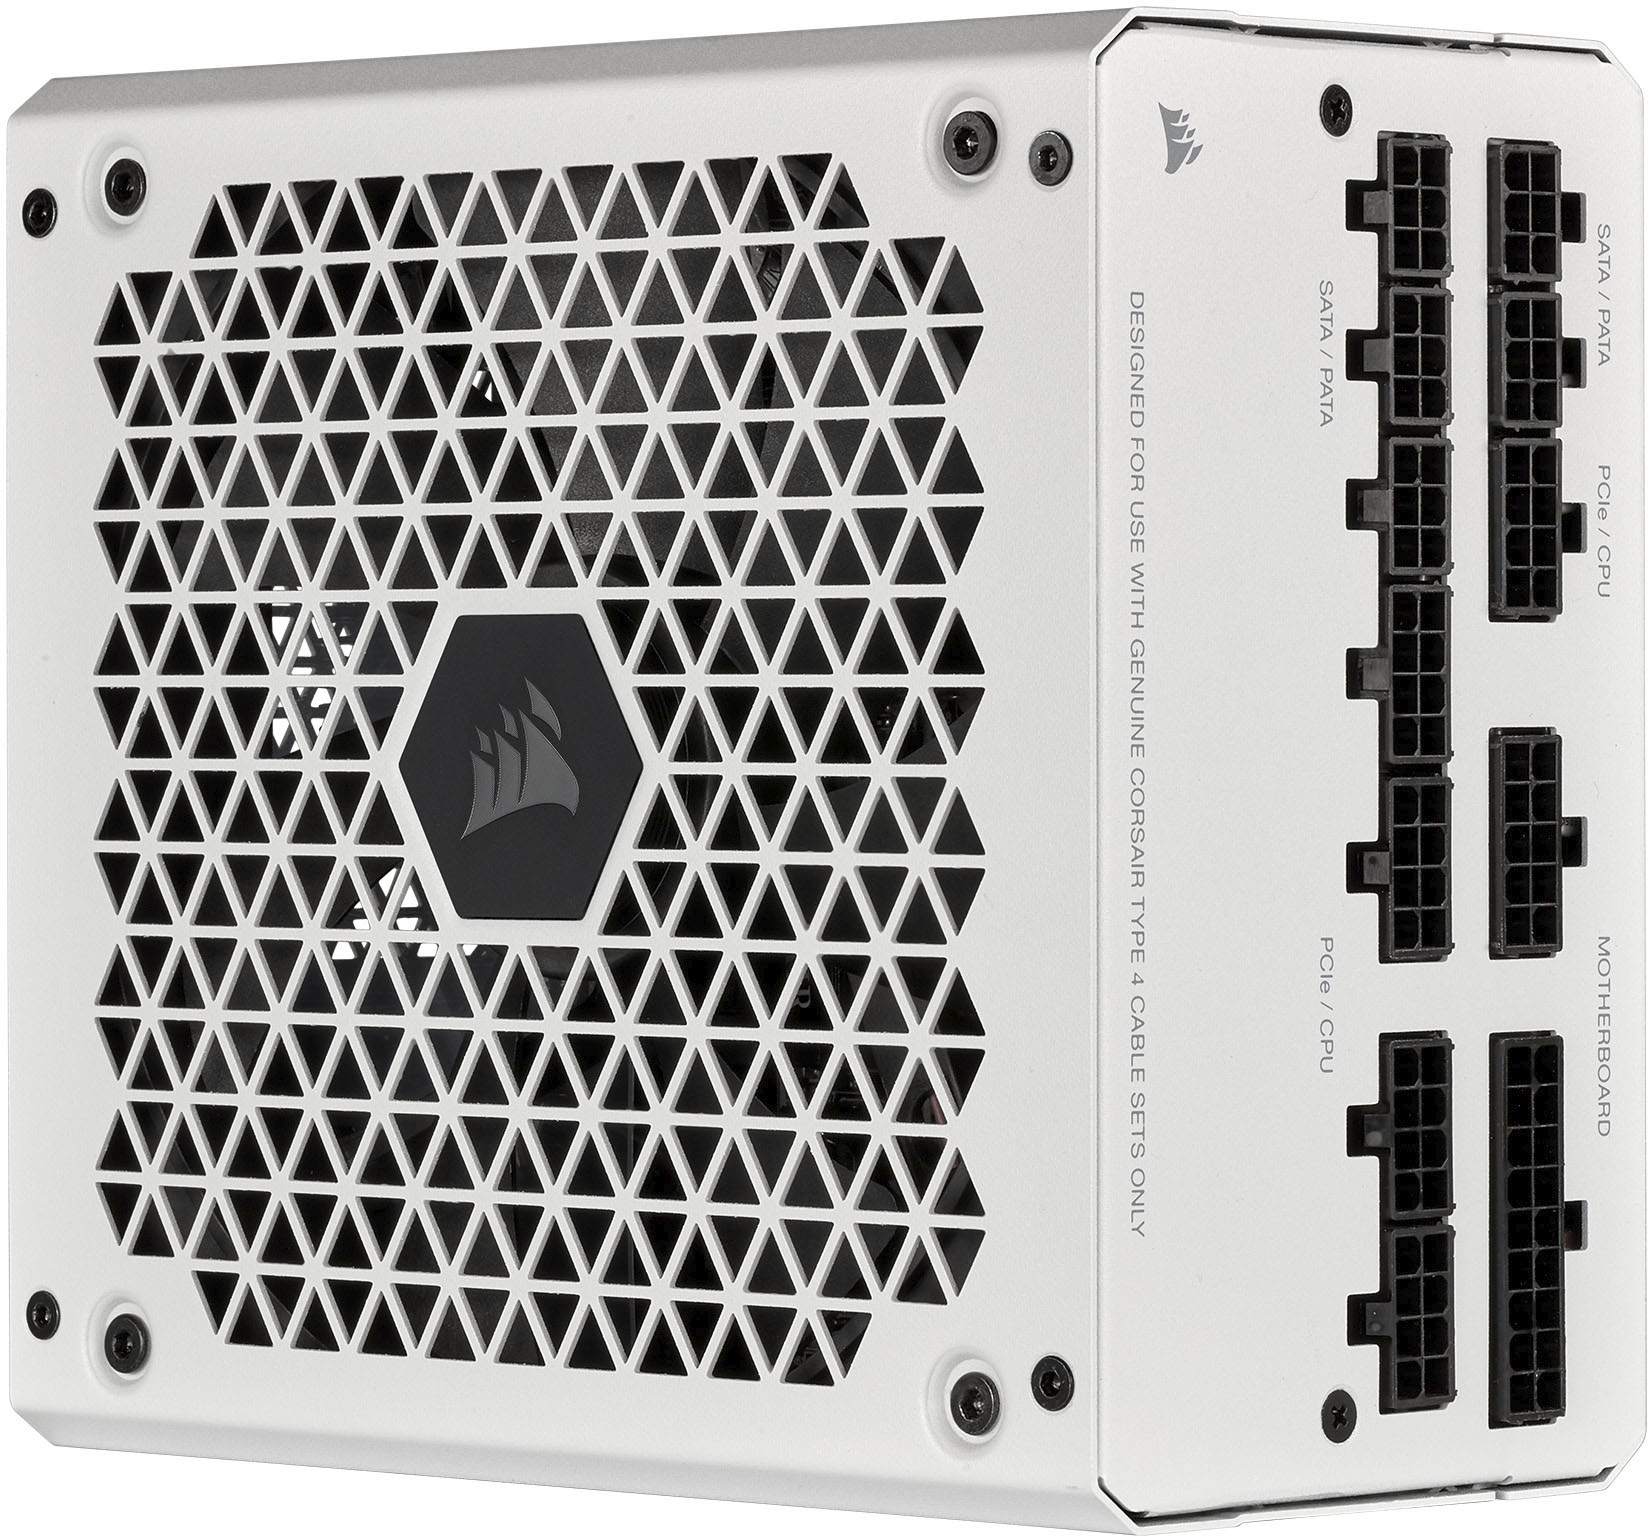 CORSAIR Series RM750 750W ATX 80 PLUS GOLD Certified Fully Modular Supply White CP-9020231-NA Best Buy